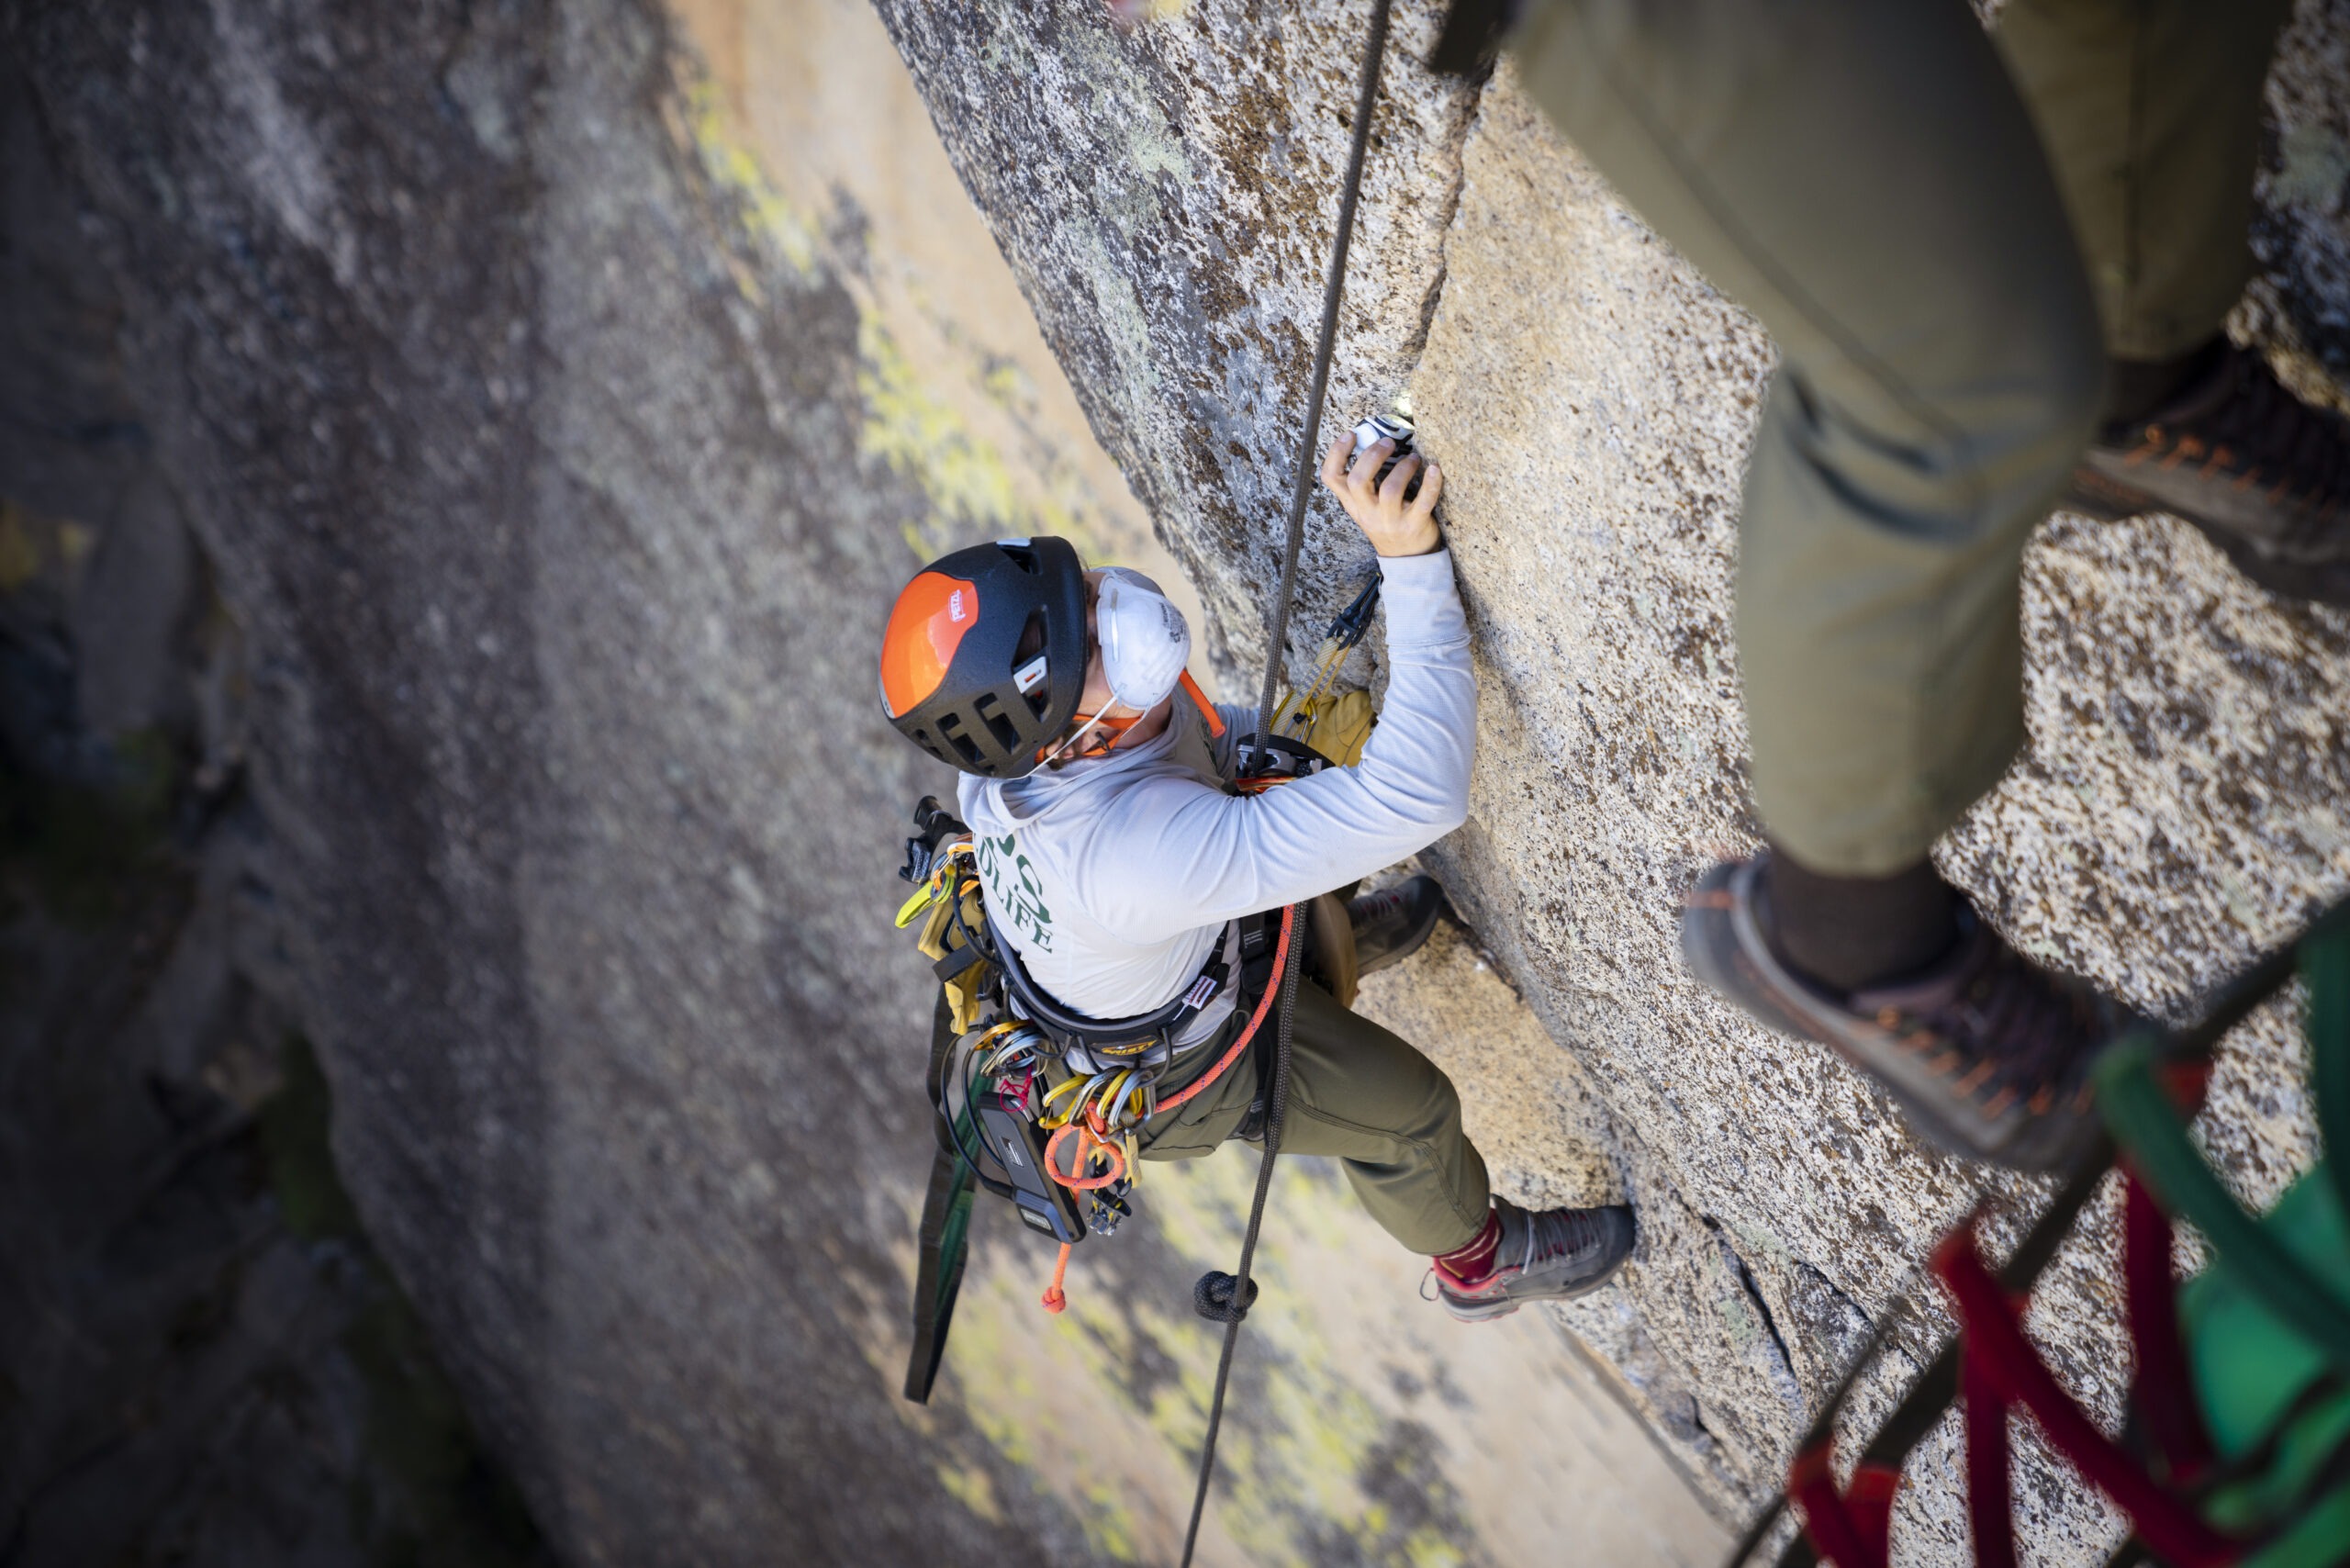 Yosemite biologists Shannon Joslin and Sean Smith scale the El Capitan rock face to locate a bat roost identified by a recreational climber. Photo: © Miya Tsudome.